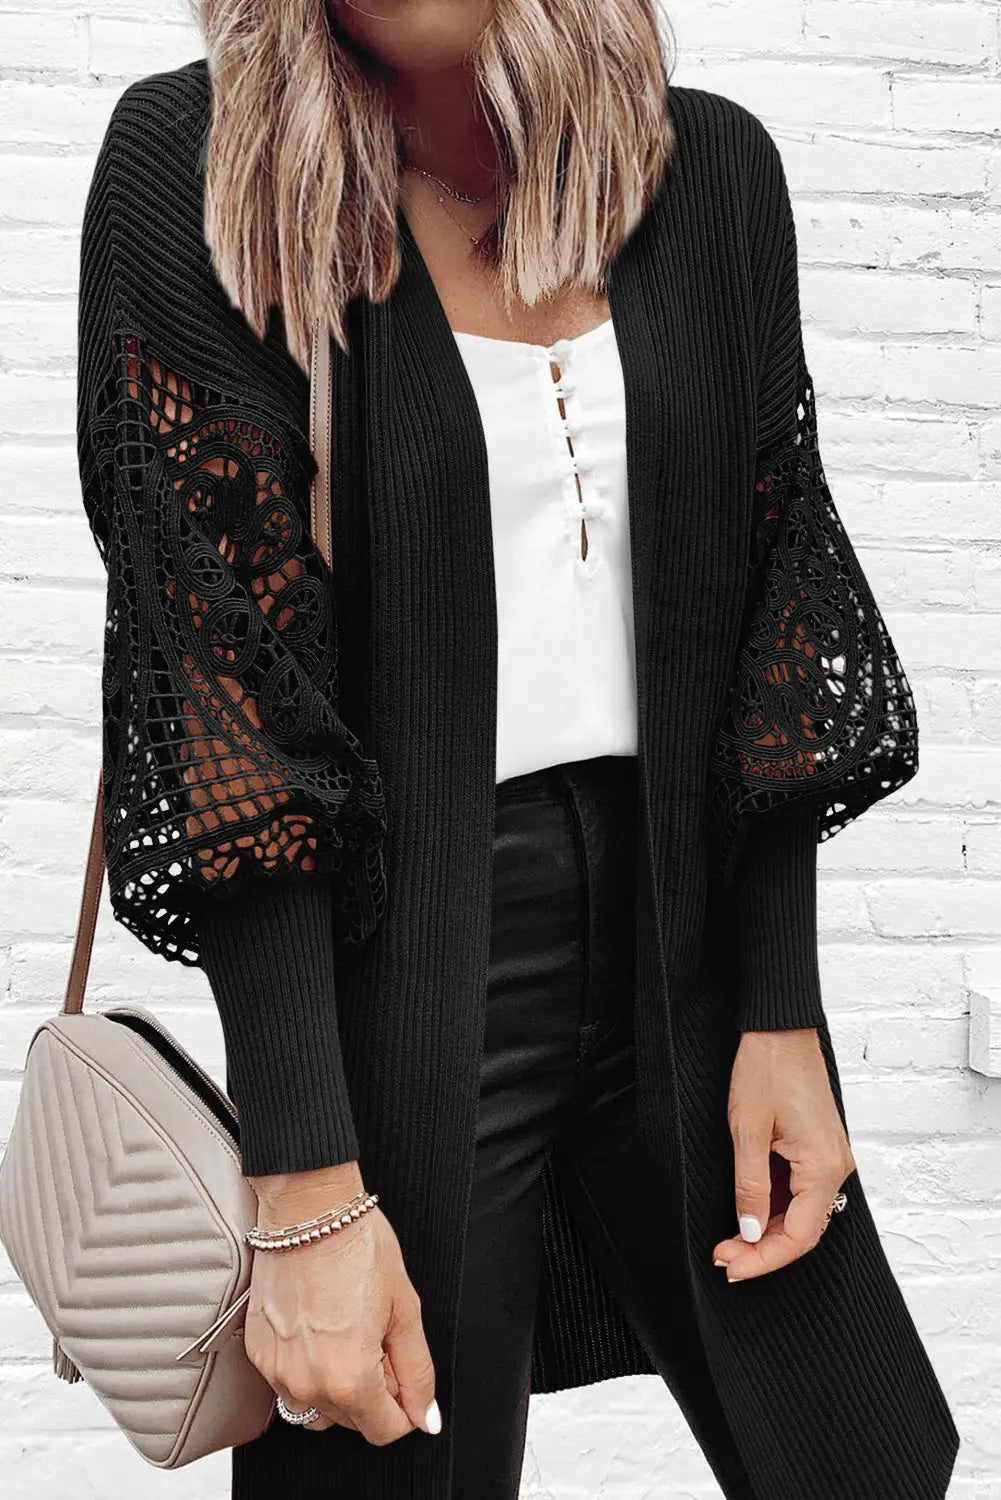 Black crochet lace sleeve ribbed knit cardigan - s / 57% viscose + 27% polyester + 16% polyamide - sweaters & cardigans